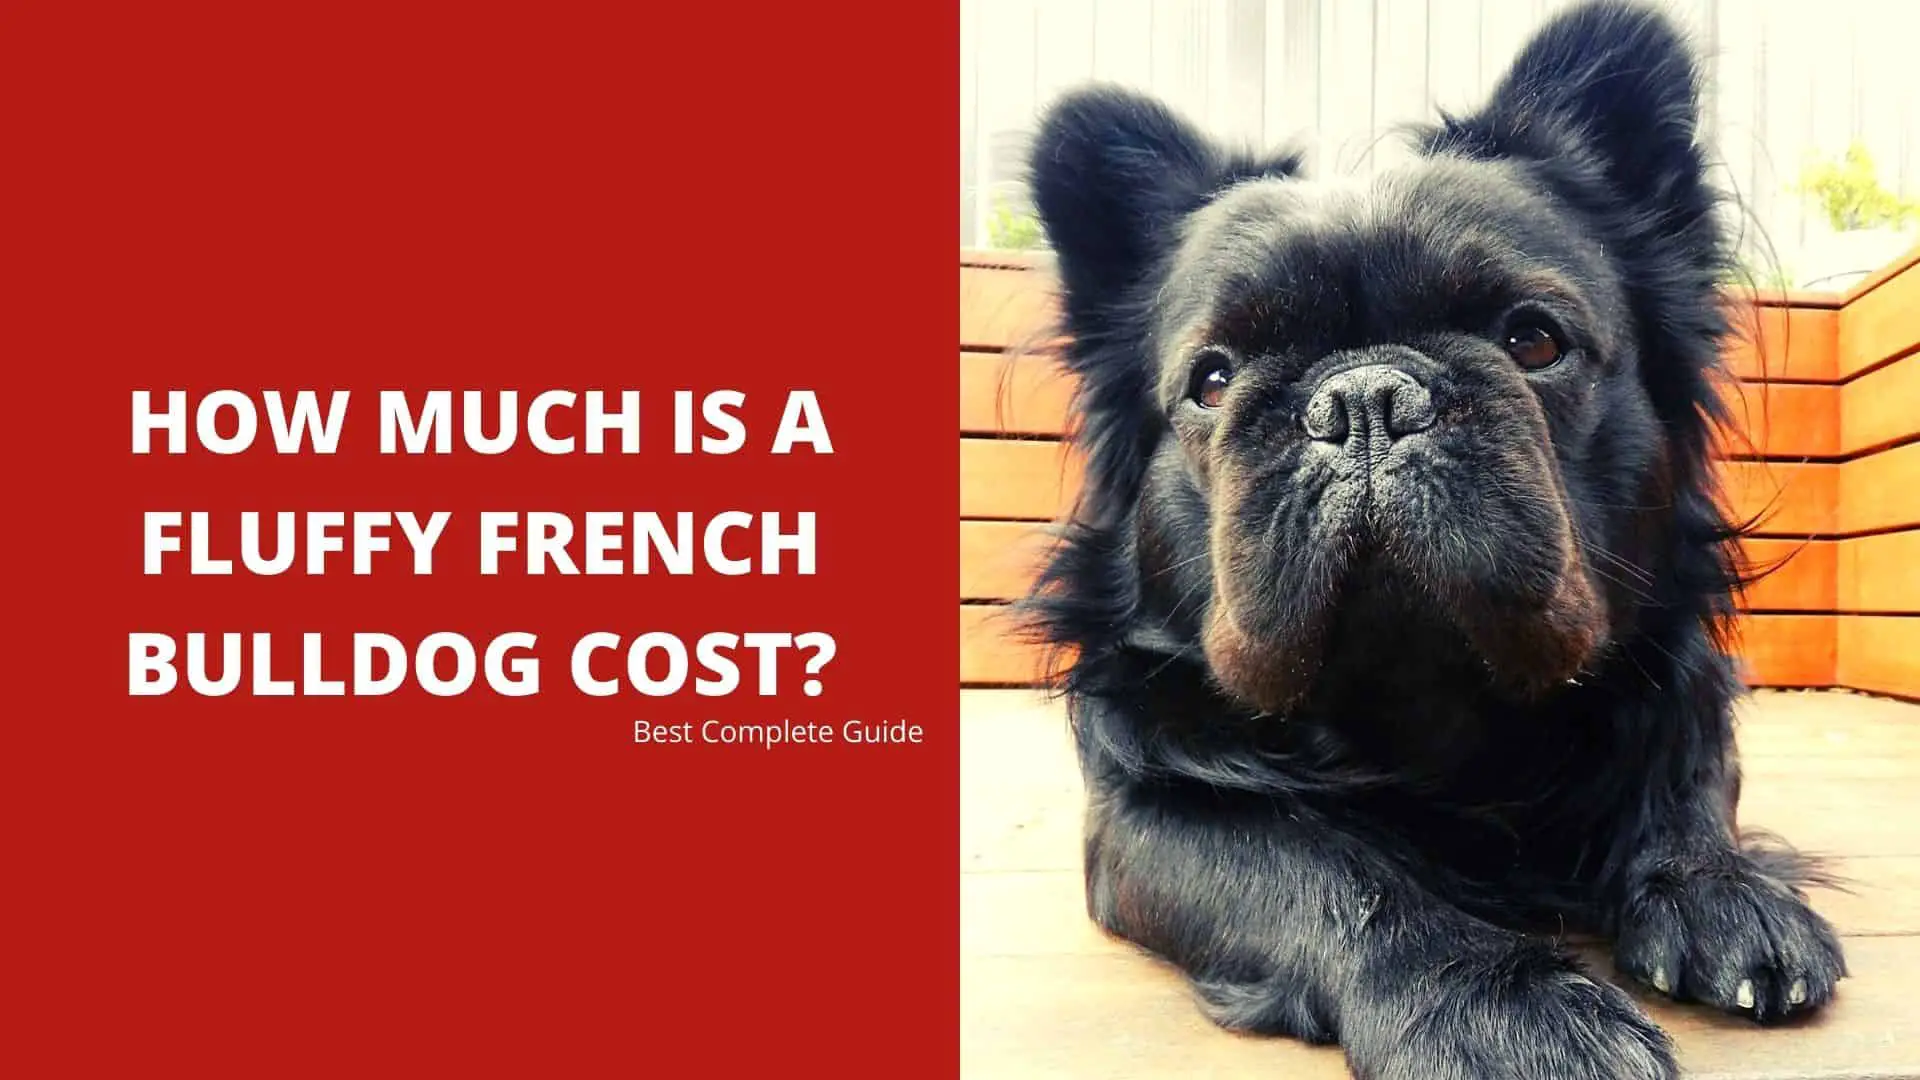 How Much Is a Fluffy French Bulldog Cost? Best Complete Guide 2022